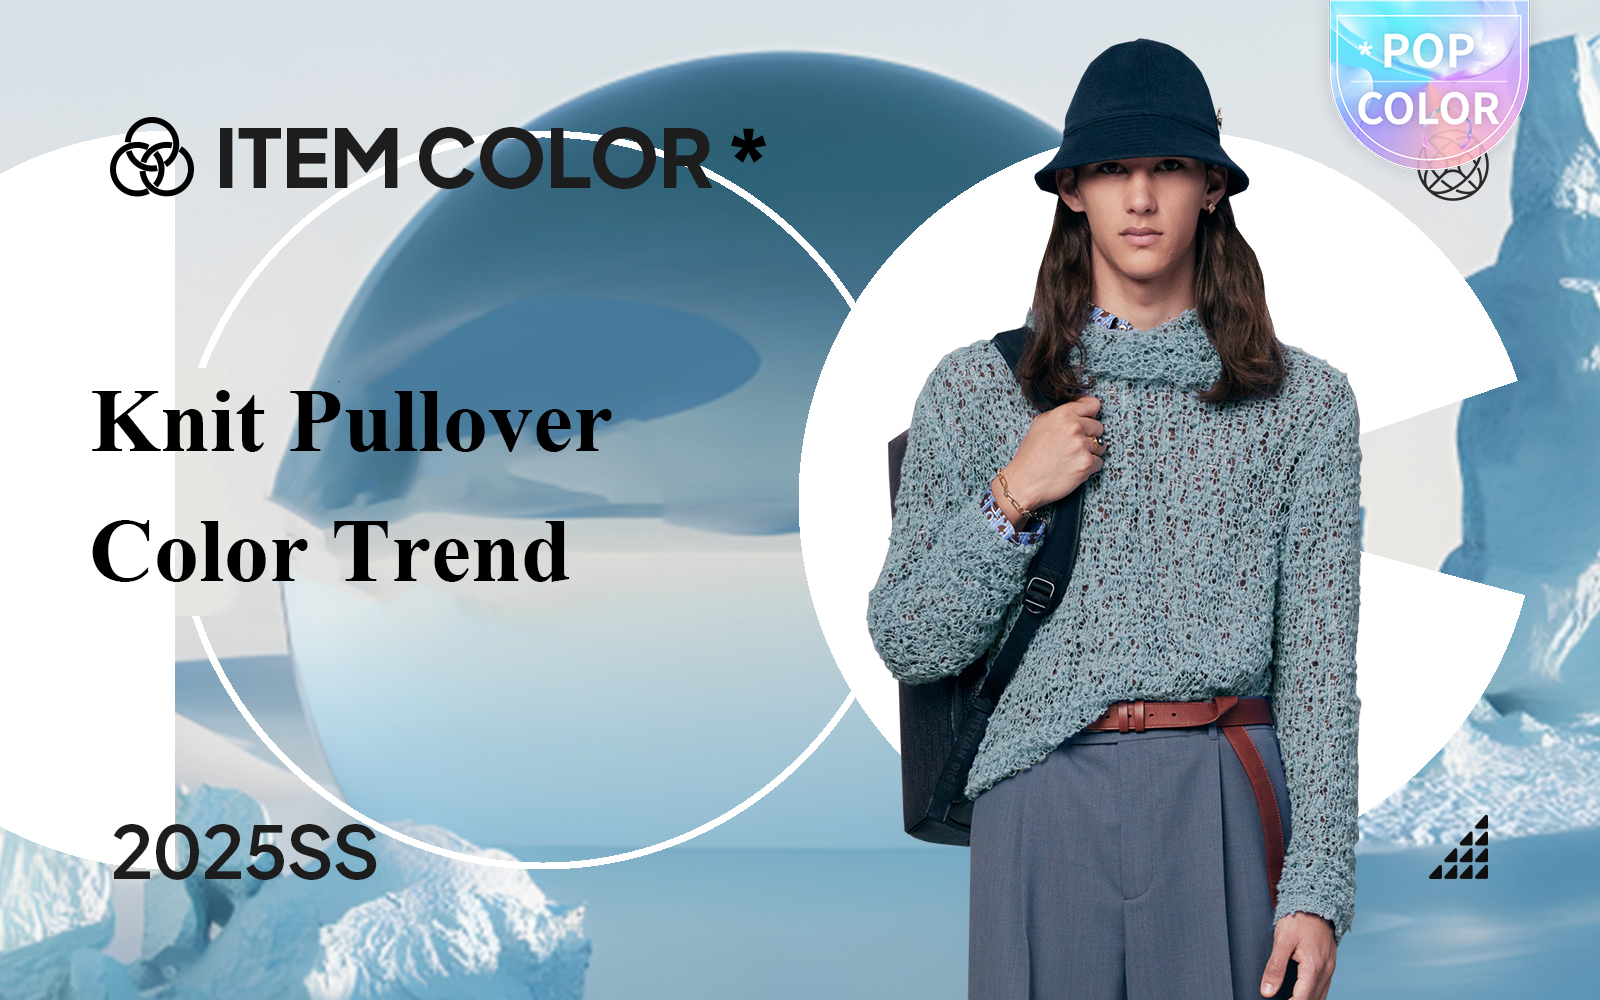 Relaxed Summer --S/S 2025 Color Trend for Men's Knit Pullover